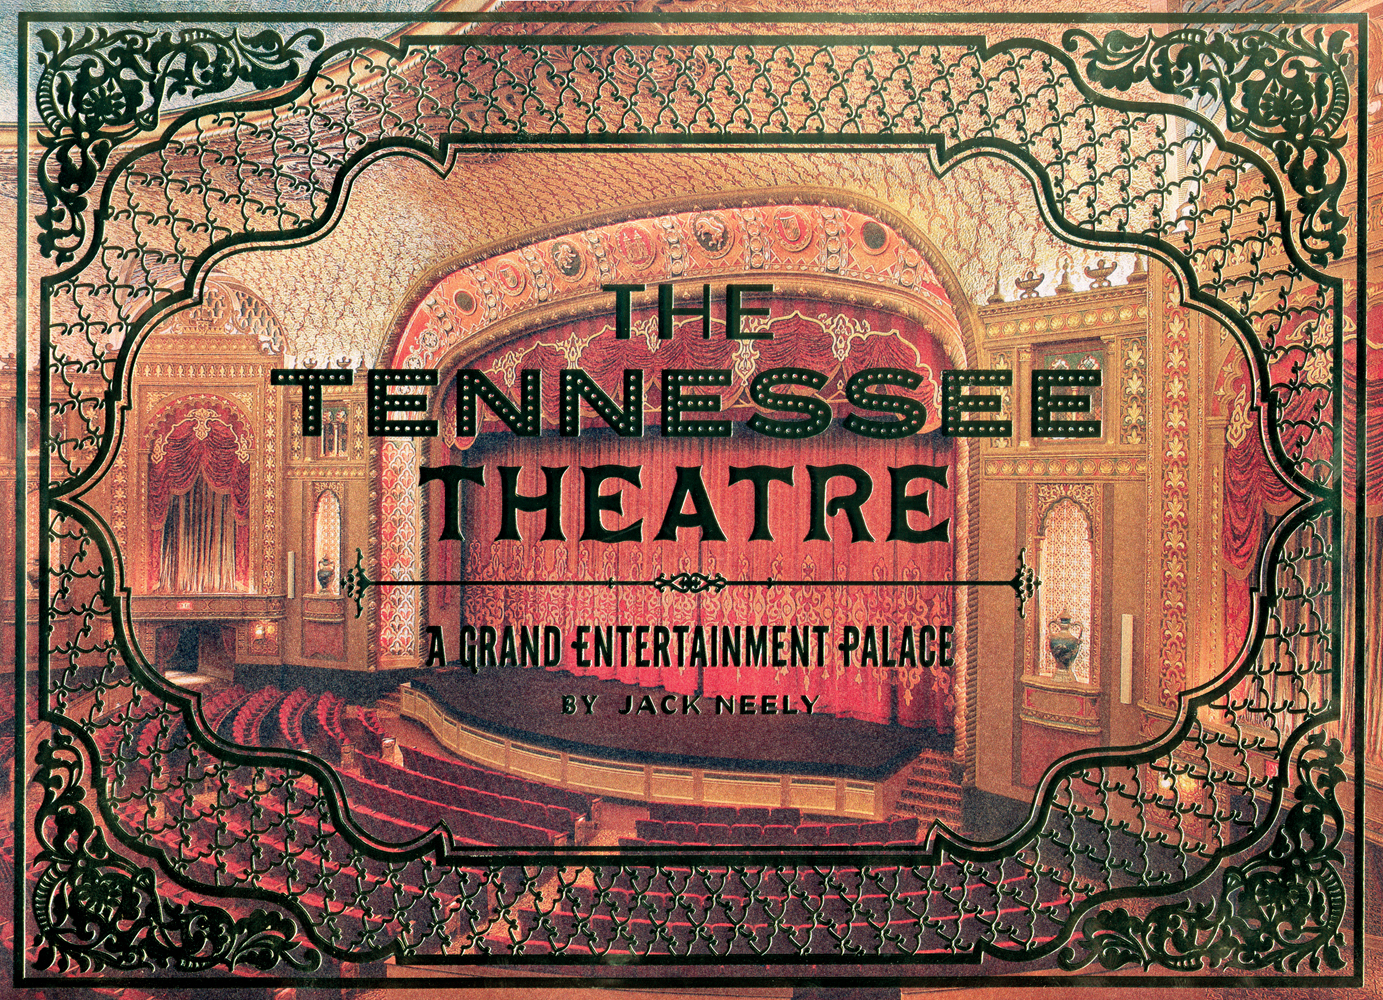 The Tennessee Theatre